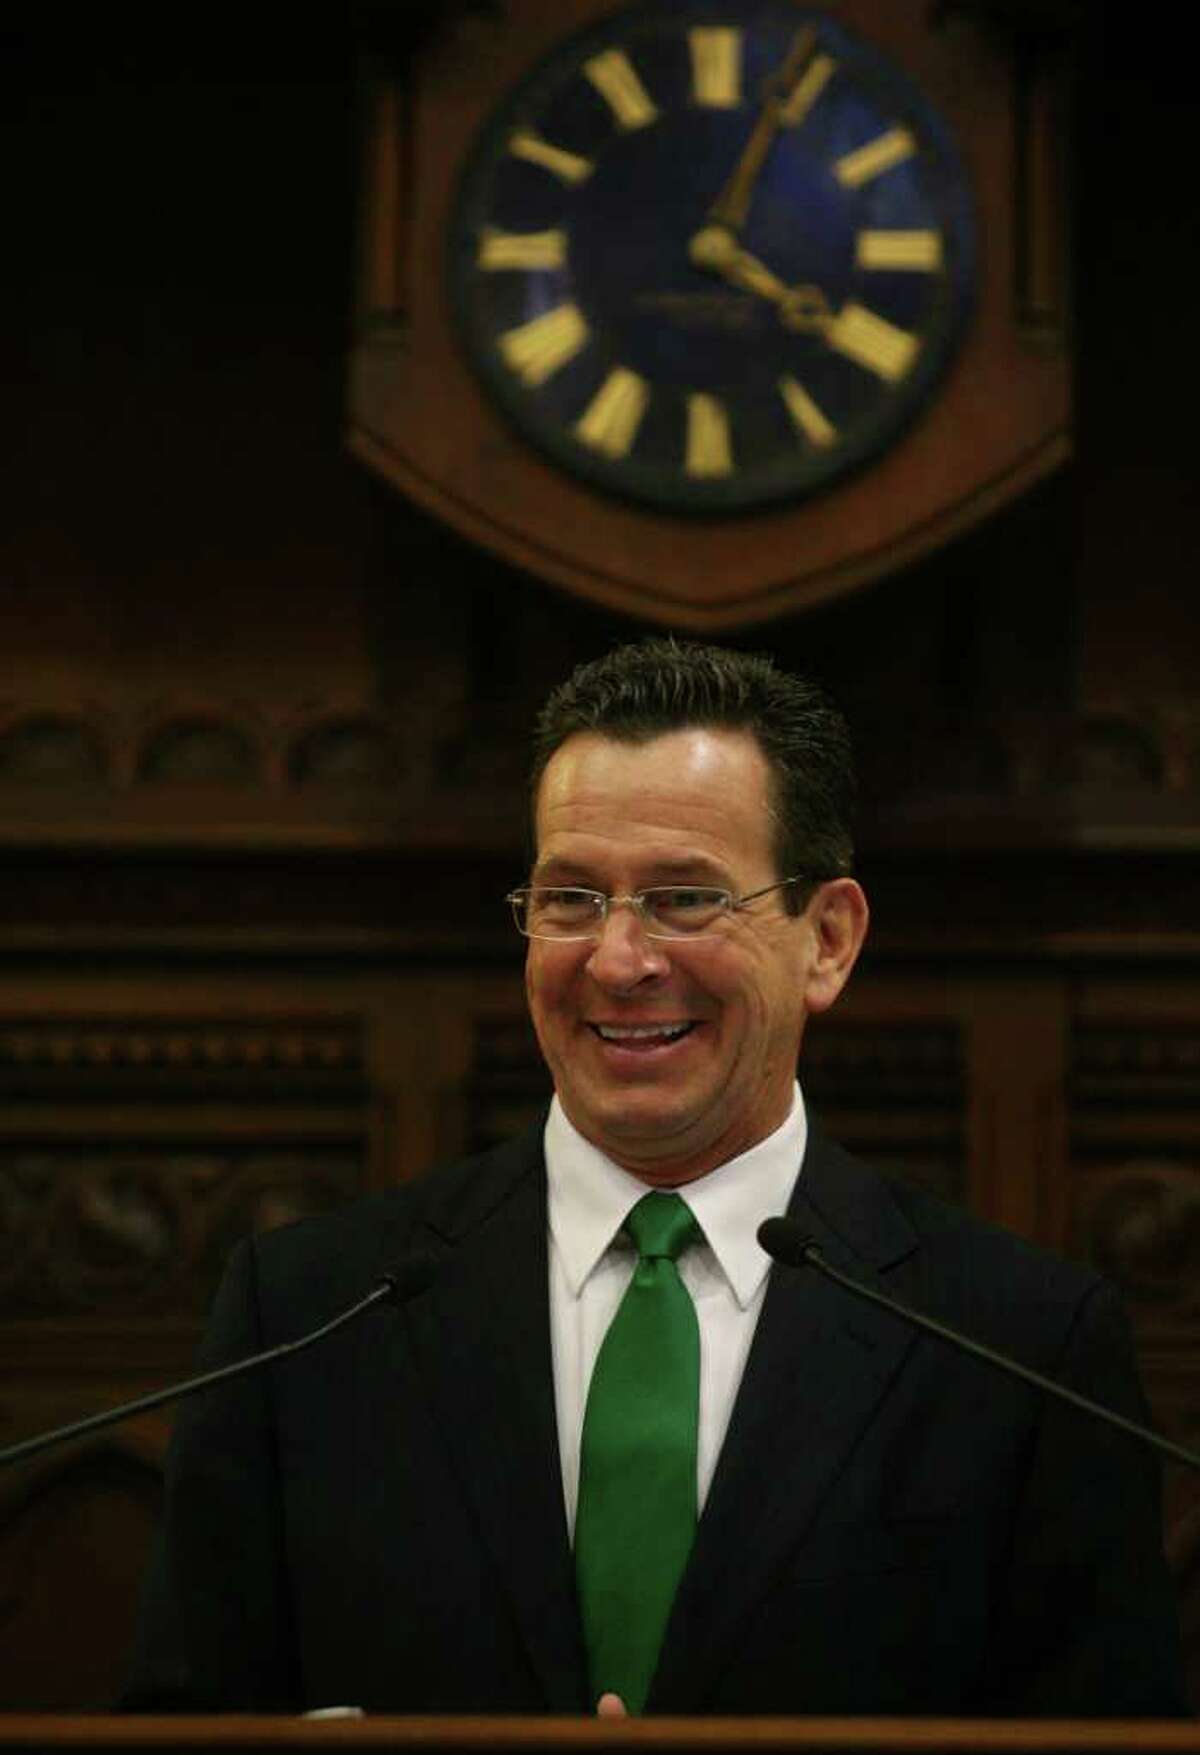 New Connecticut Governor Dannel Malloy addresses a joint session of the Connecticut General Assembly after his inauguration in Hartford on Wednesday, January 5, 2011.